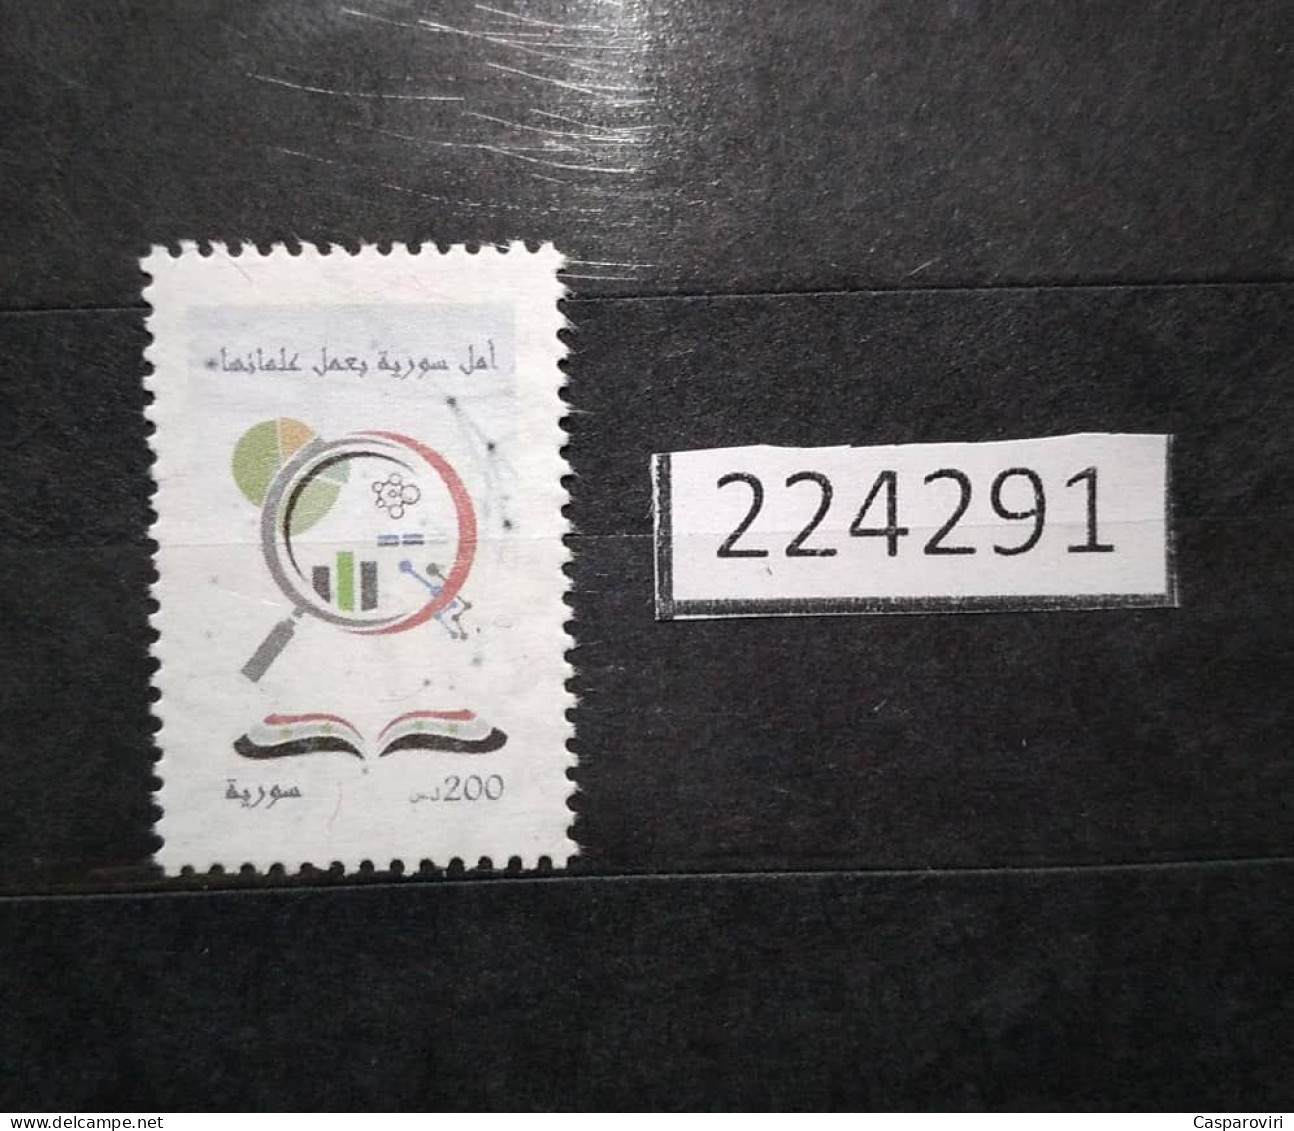 224291; Syria; Revenue Stamps; 200 Pounds; General Fiscal Stamps; Science Research Support Stamp; Fiscal; MNH - Syrie